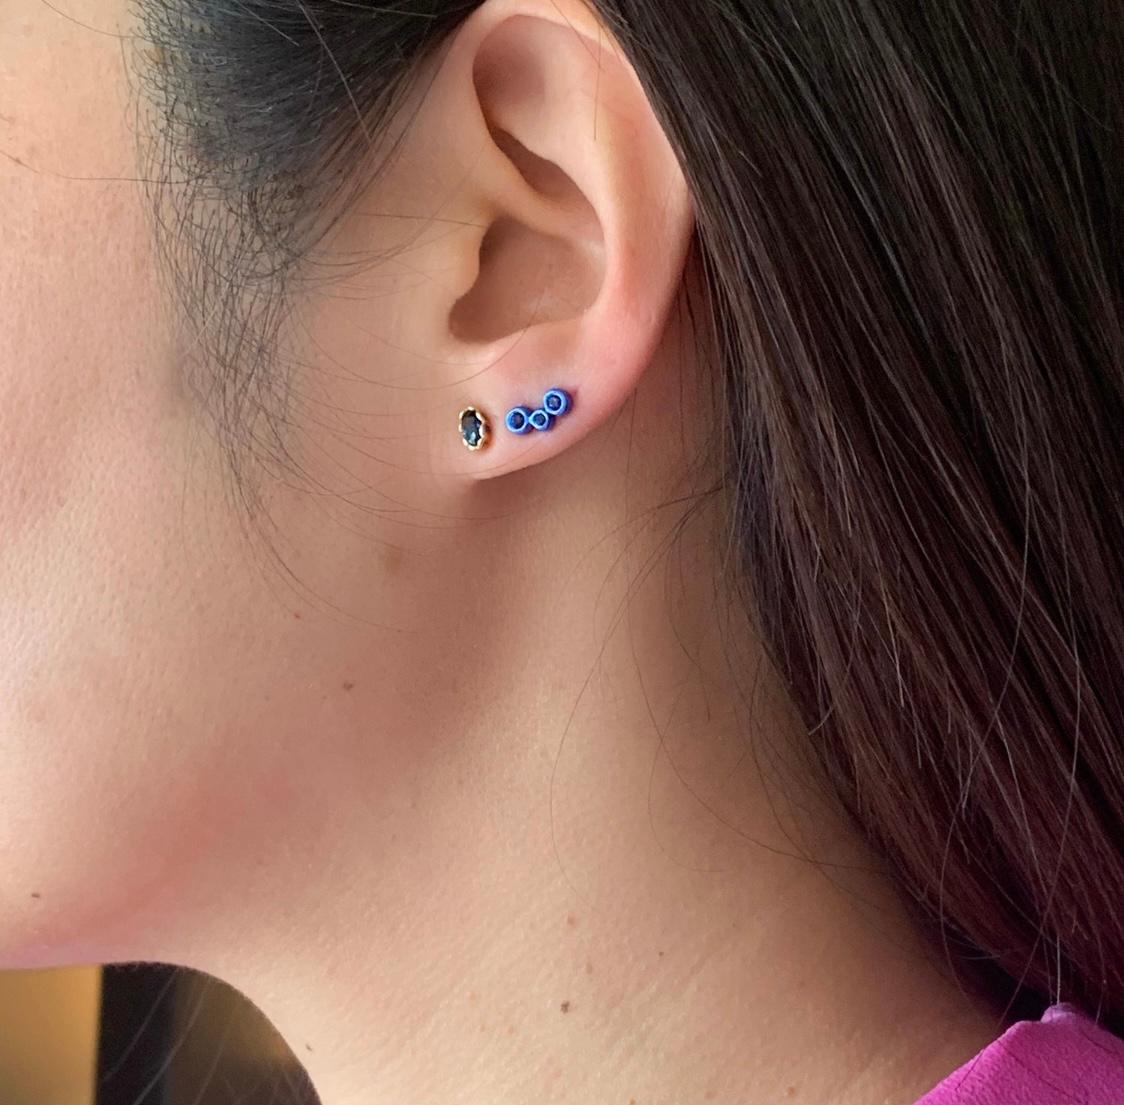 Hi June Parker's mini version of her climber earrings, adding a pop of
electric Blue to your ears with this 3-stone SINGLE stud.

Inspired by seeing the cross-section view of life, as if slicing a tree to see its underlying structure and raw beauty,